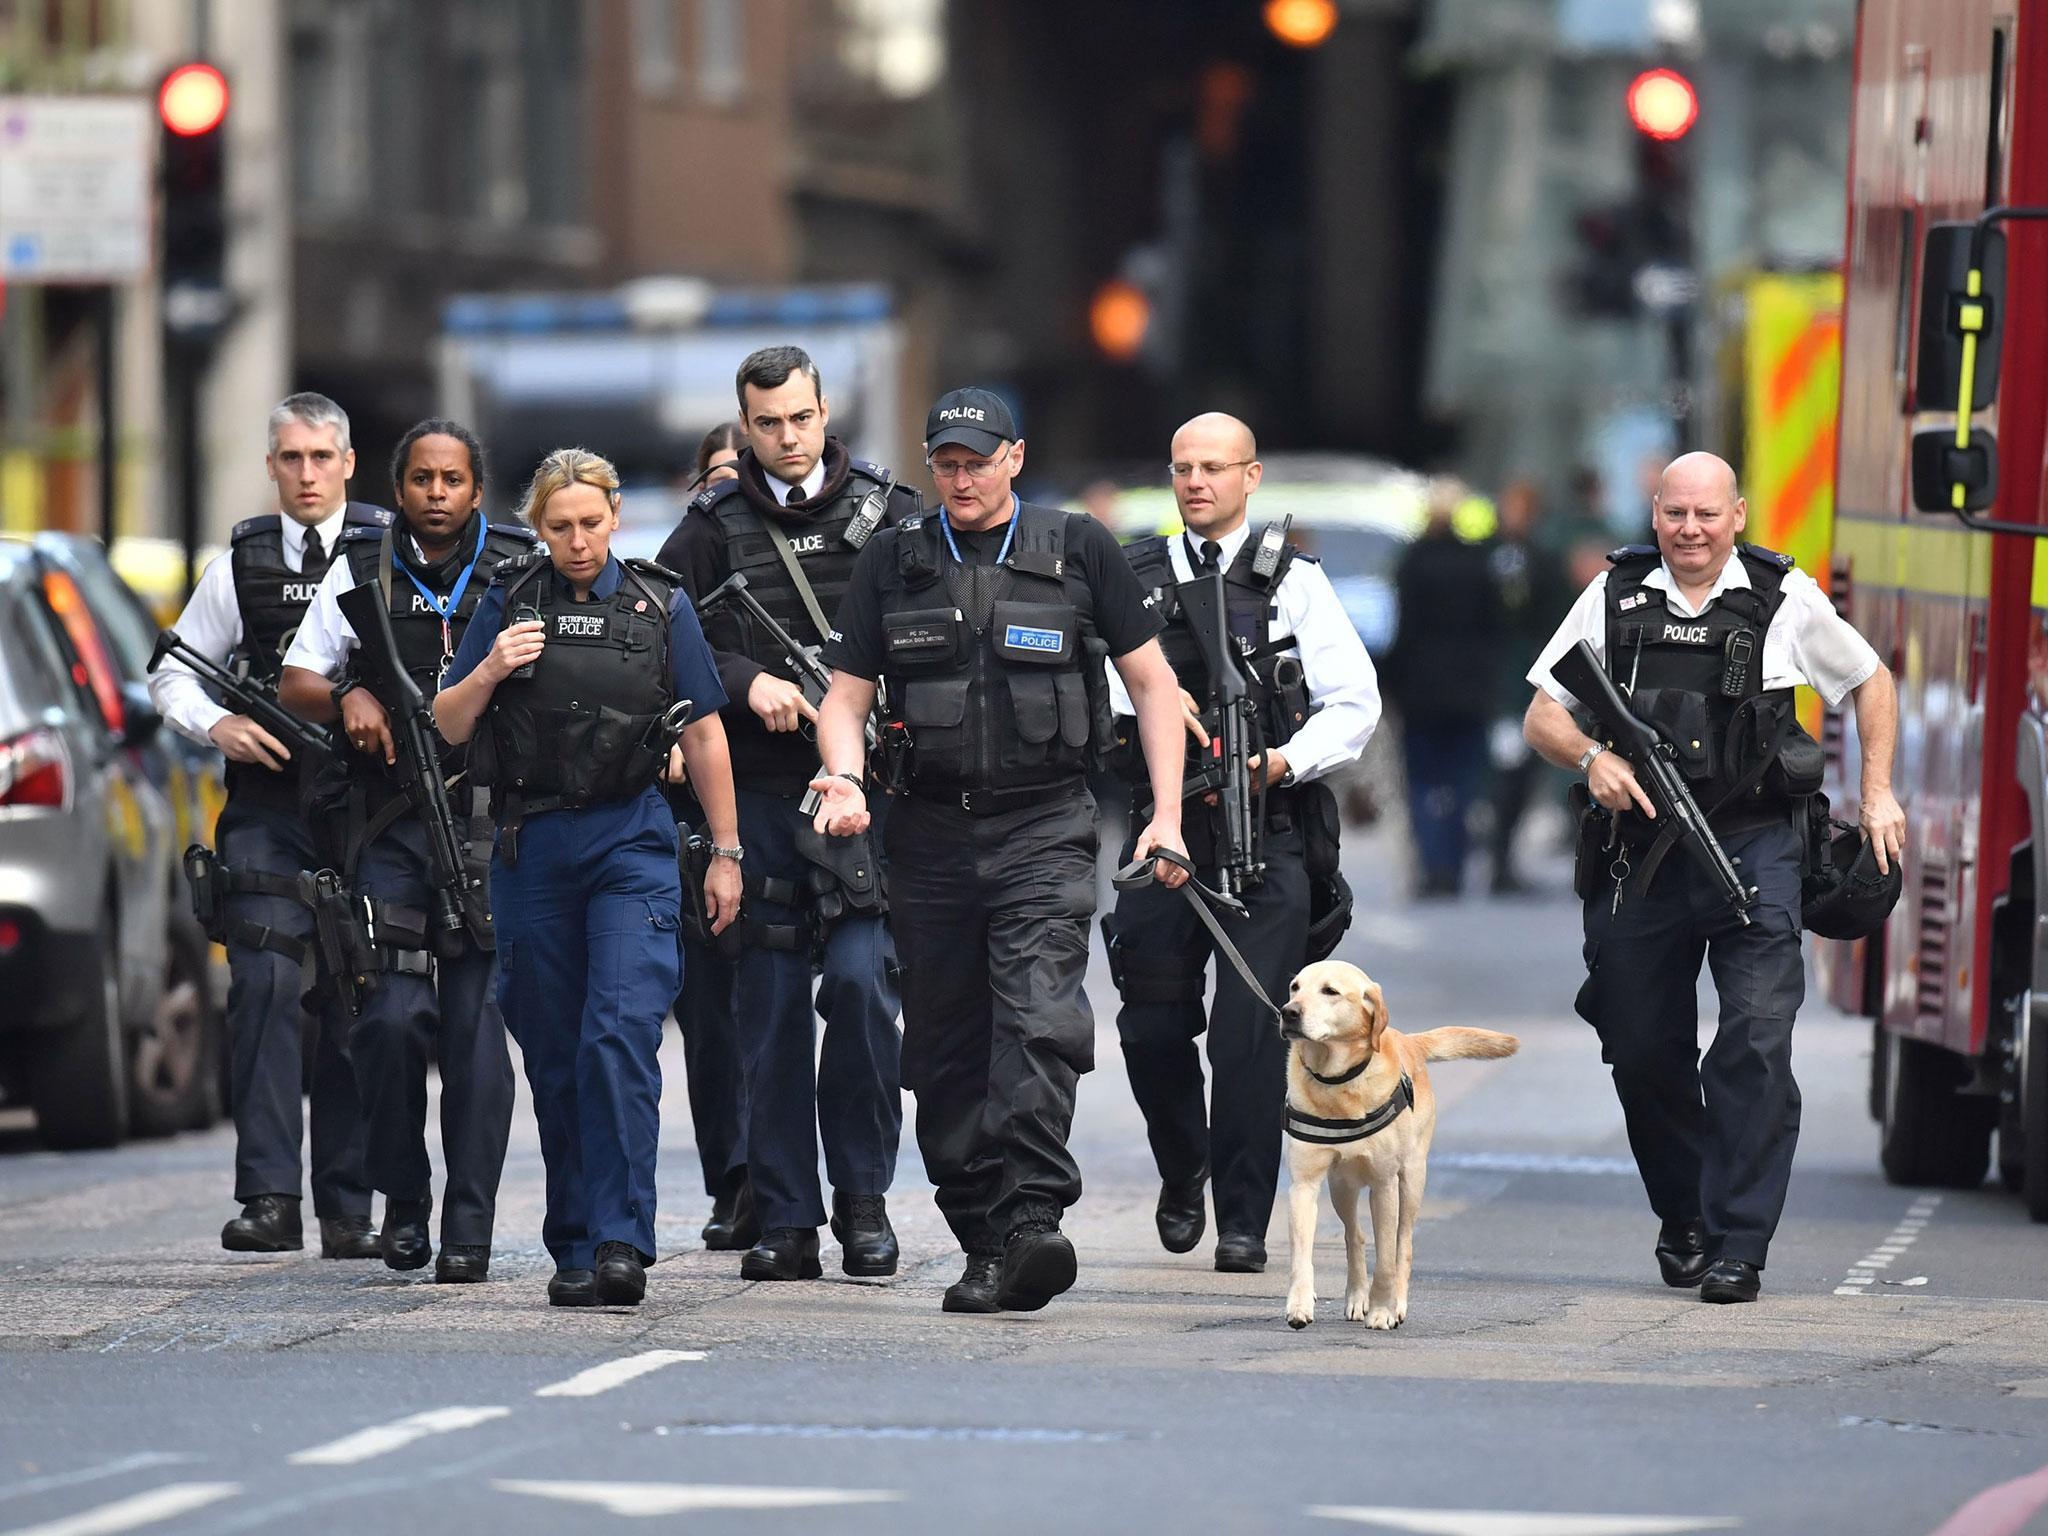 The best way to stop future attacks is to fund the expensive but dull (and often invisible) police work